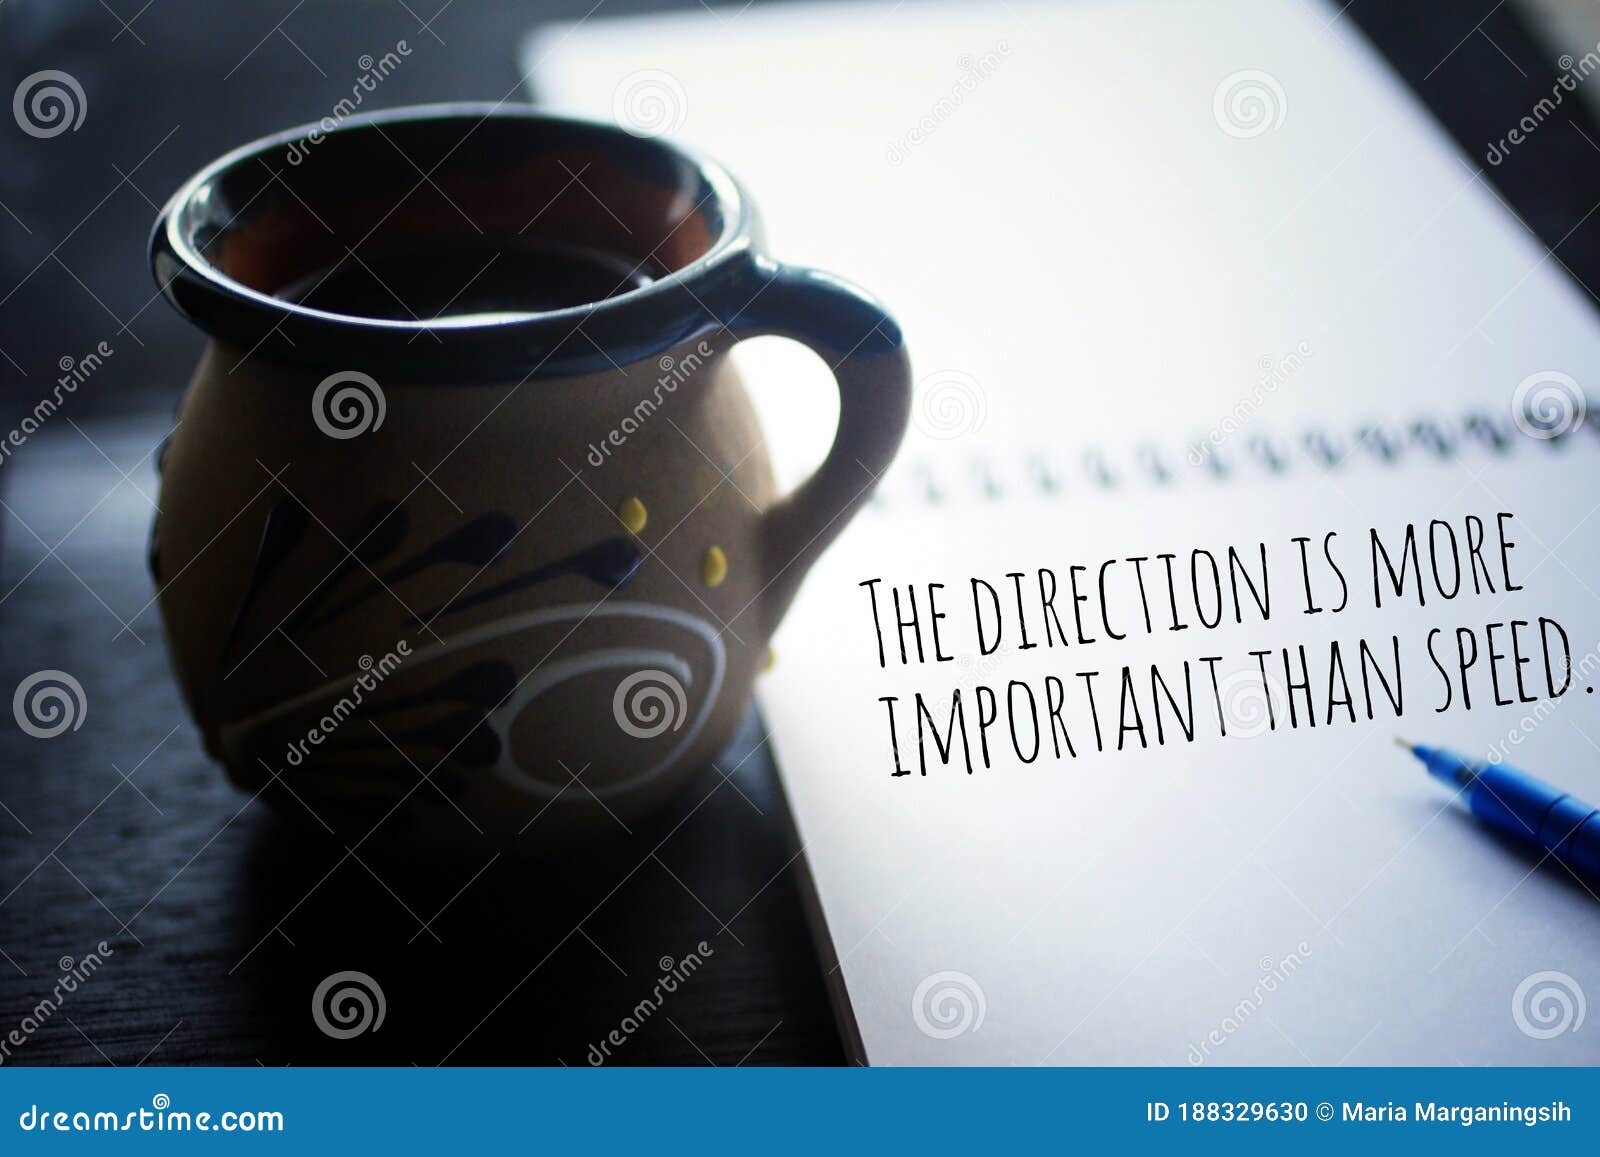 inspirational motivational quote - the direction is more important than speed. text message on paper book with a cup of coffee.